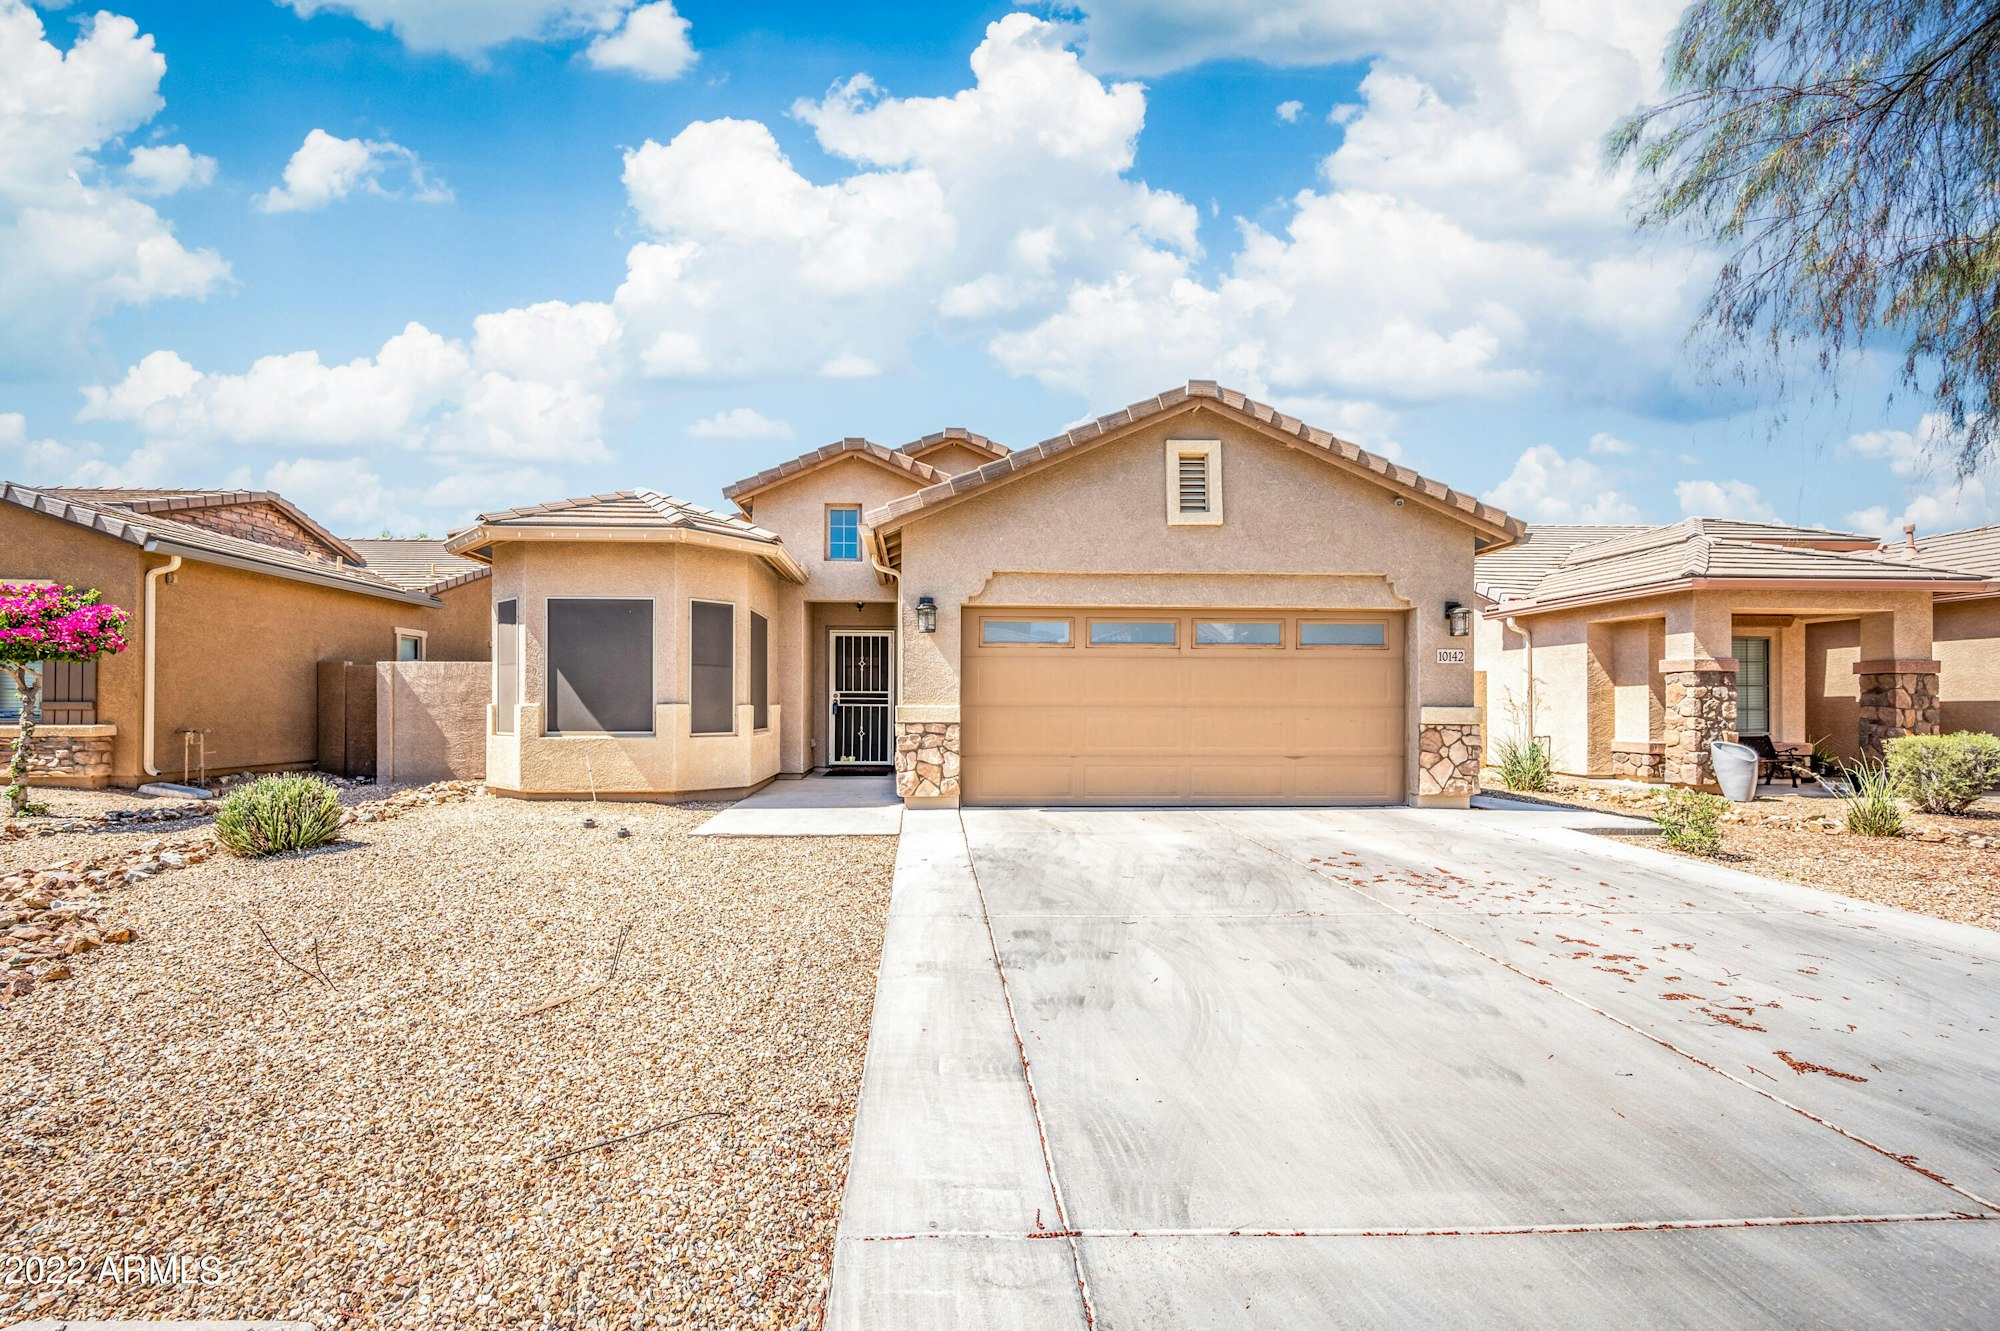 Photo 1 of 27 - 10142 W Wier Ave, Tolleson, AZ 85353